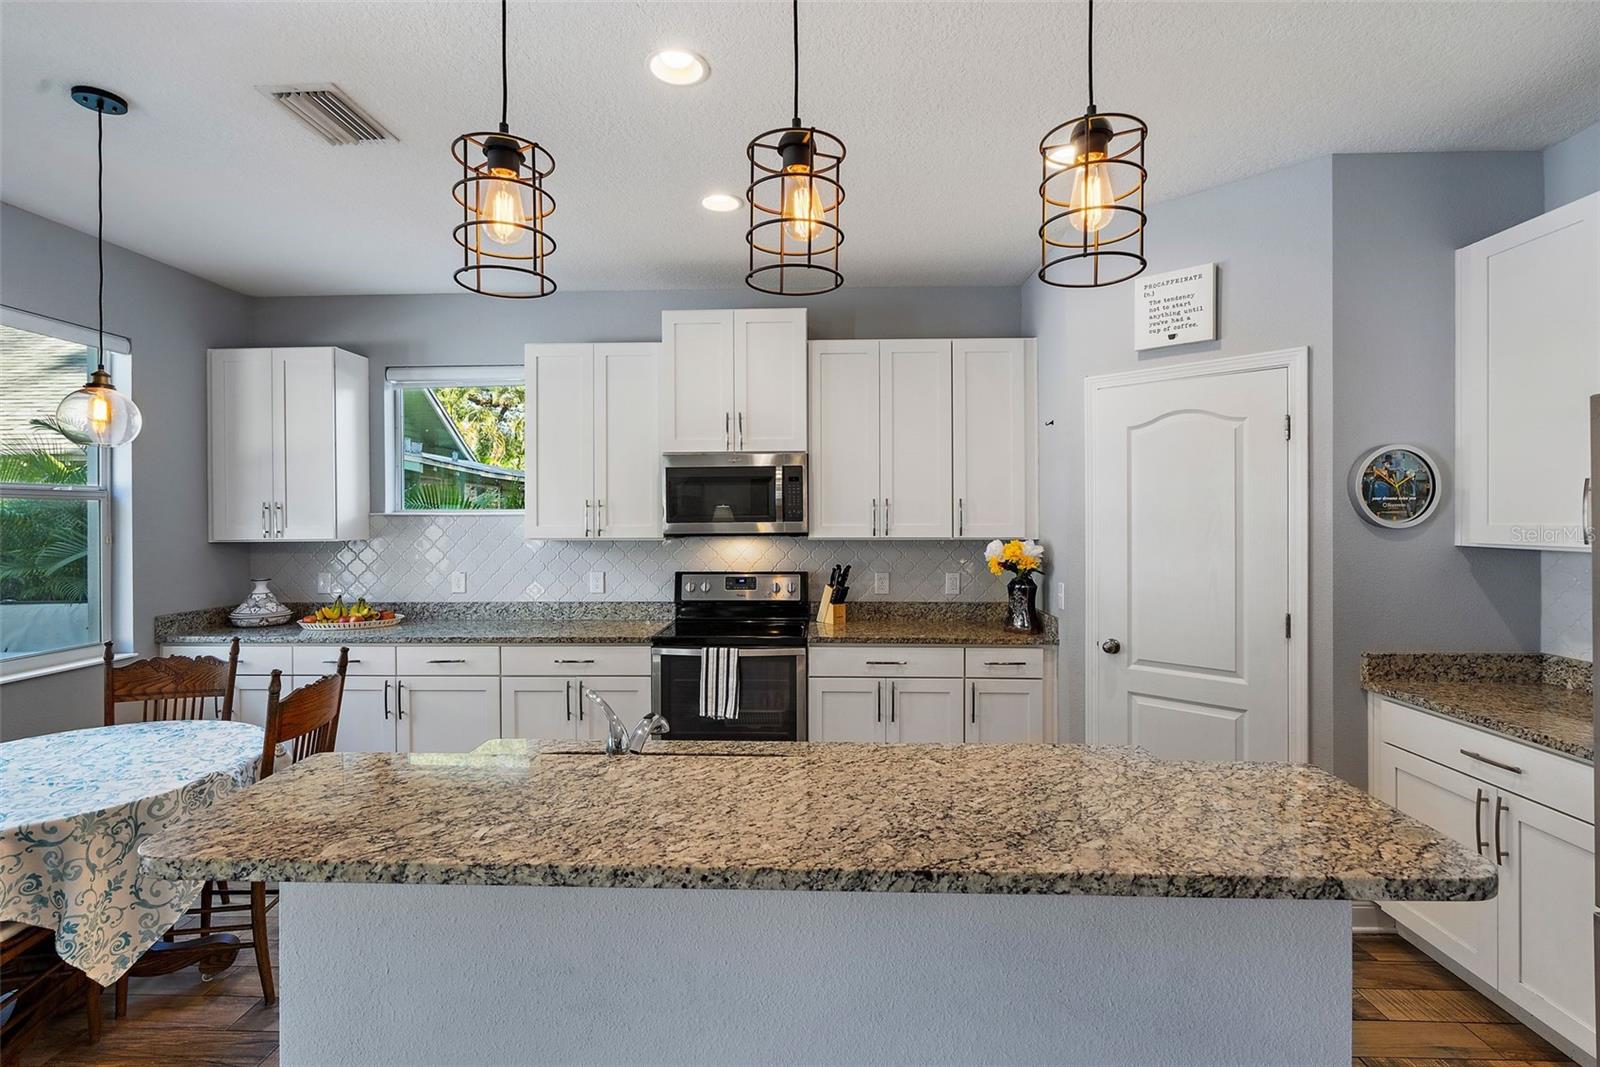 Kitchen offers granite countertops, center island, stainless appliances, and a walk-in closet pantry. Open, airy, light and bright!